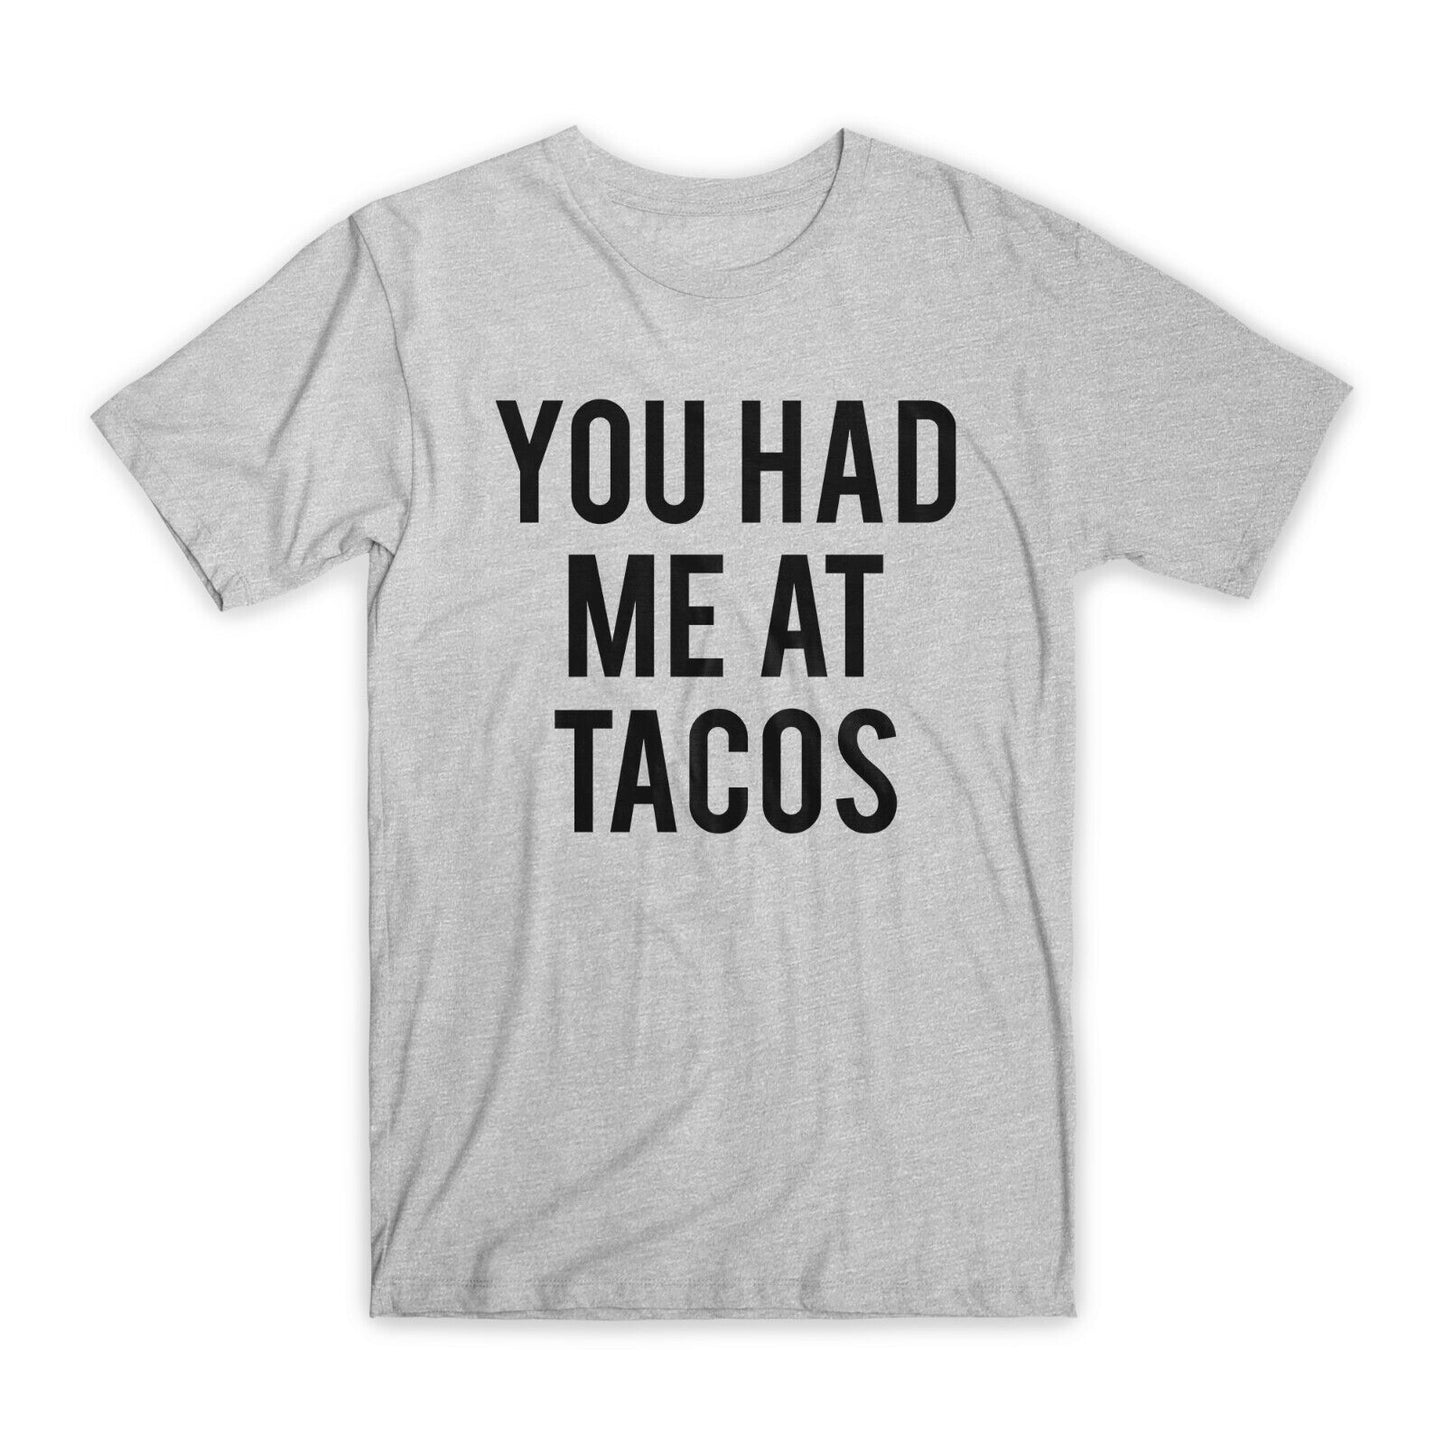 You Had Me at Tacos T-Shirt Premium Soft Cotton Crew Neck Funny Tees Gifts NEW